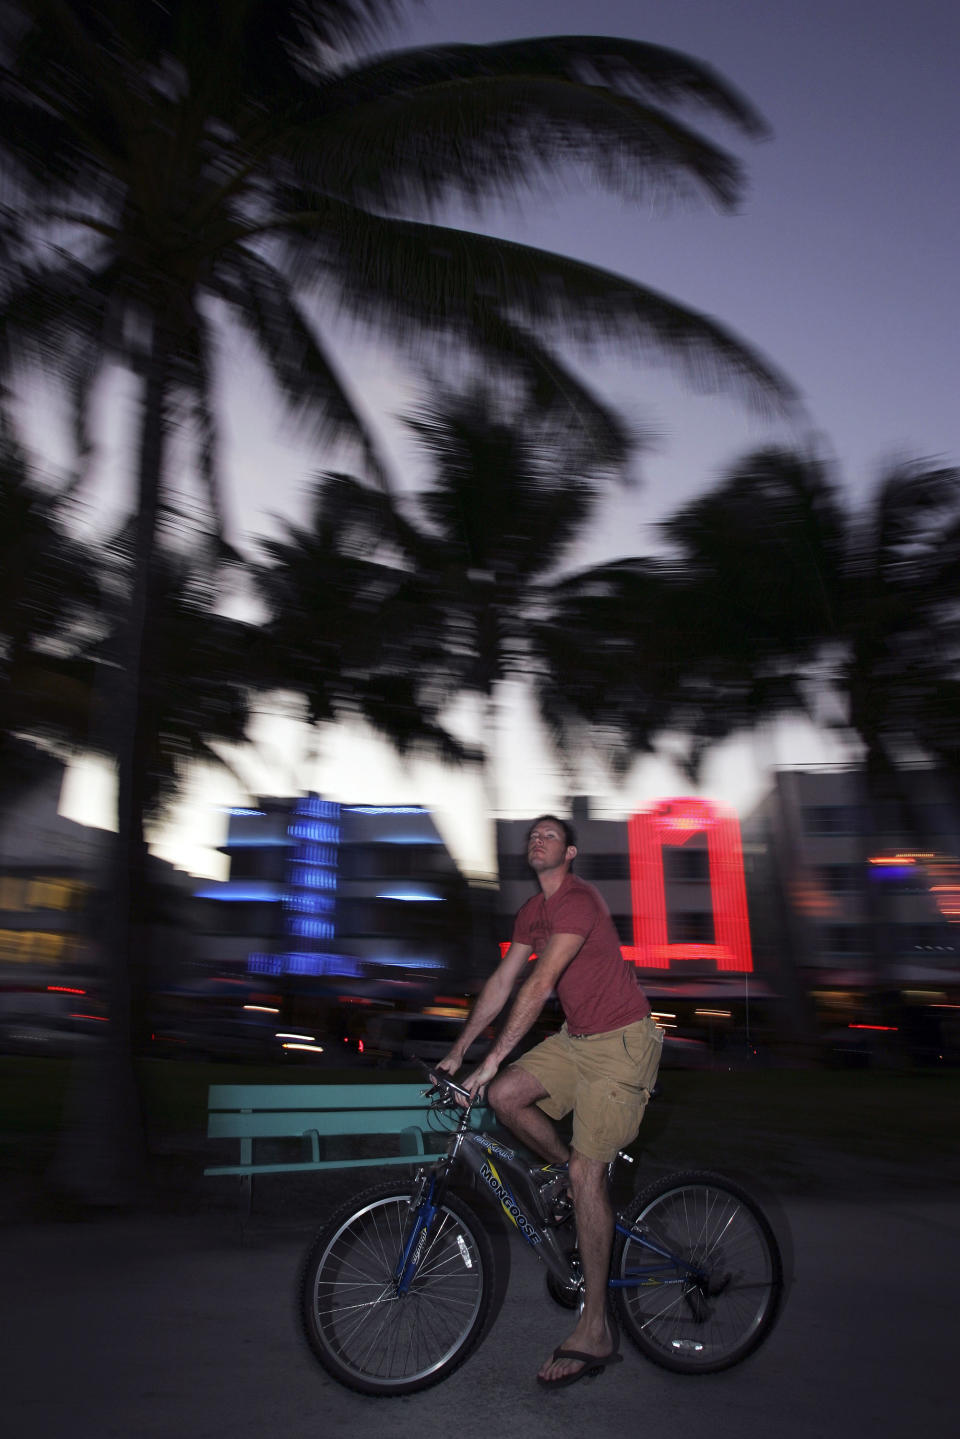 FILE - In this Jan. 31, 2007 file photo, a man rides a bike in the South Beach area of Miami Beach, Fla. The bike scene in Miami has taken off in recent years, and since parking is expensive and can be hard to find, riding a bike can be a great way to get around. (AP Photo/Carlo Allegri, File)